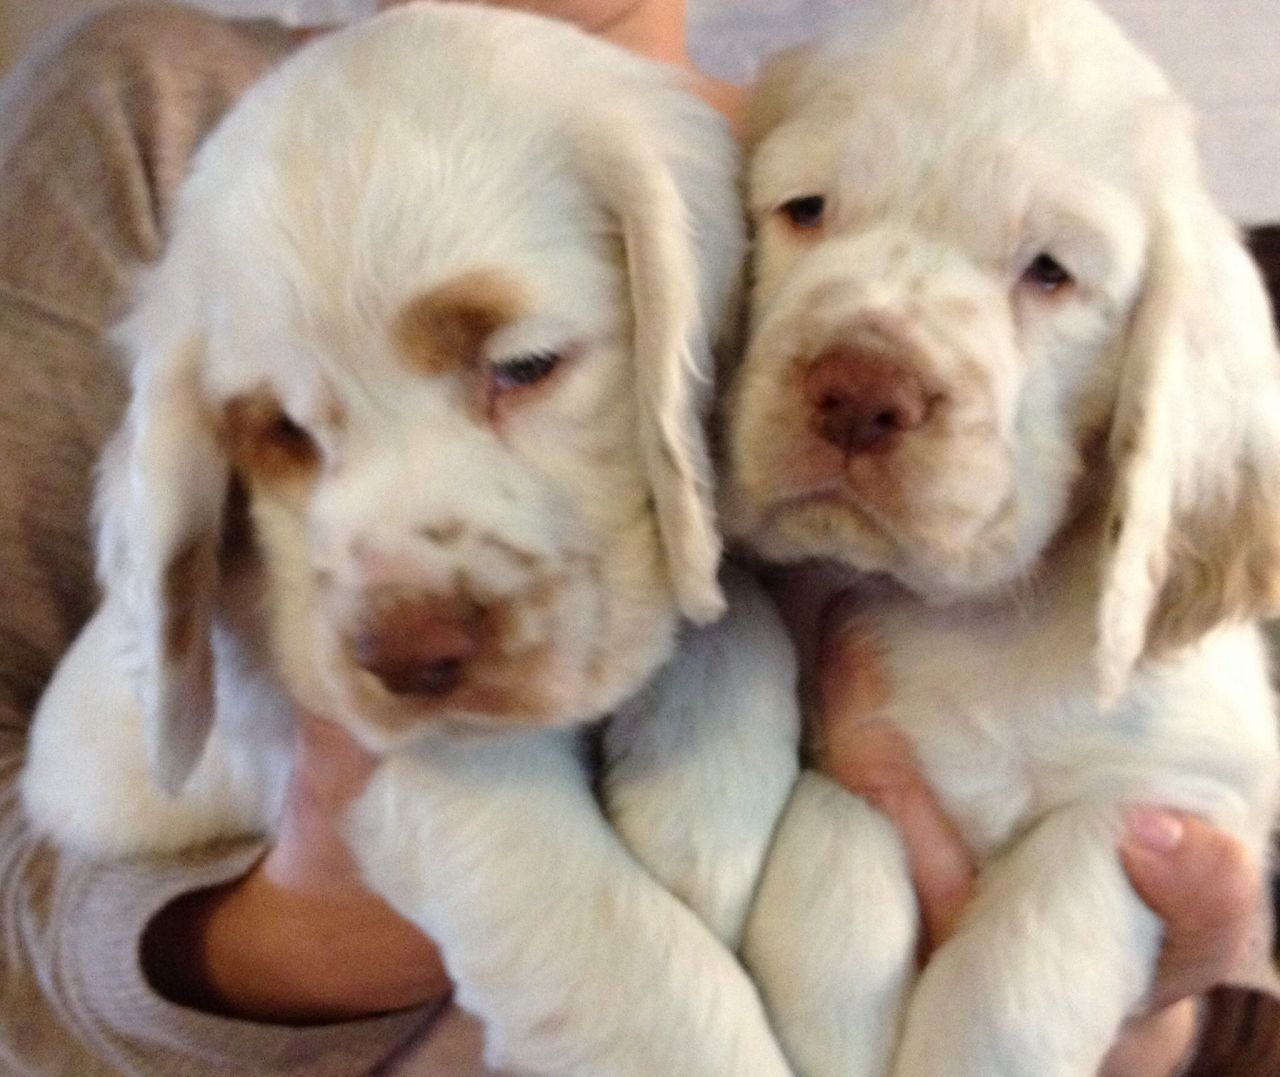 Clumber Spaniel Puppies: Clumber Kc Clumber Spaniel Pups With Coi Of Ramsgate Breed